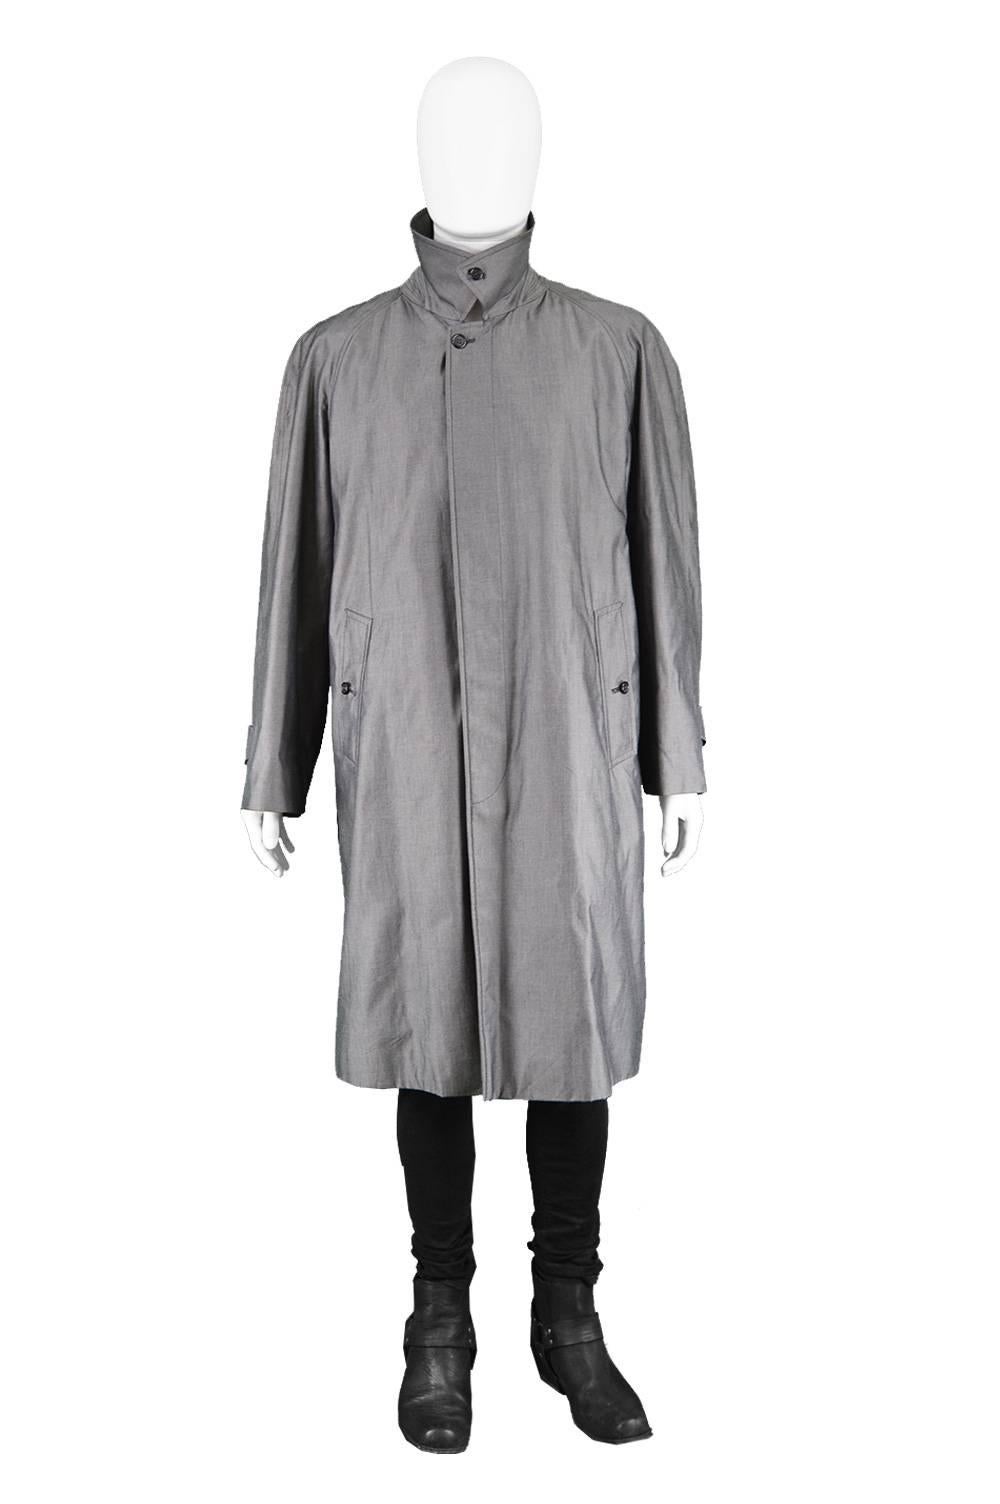 Burberry Men's 100% Cotton Sharkskin Raglan Sleeve Trenchcoat, 1980s


Size: Marked 52 Short which is roughly a men's Large to XL but could fit up to XXL due to the loose fit and really suits more of an average or taller height man. Please check